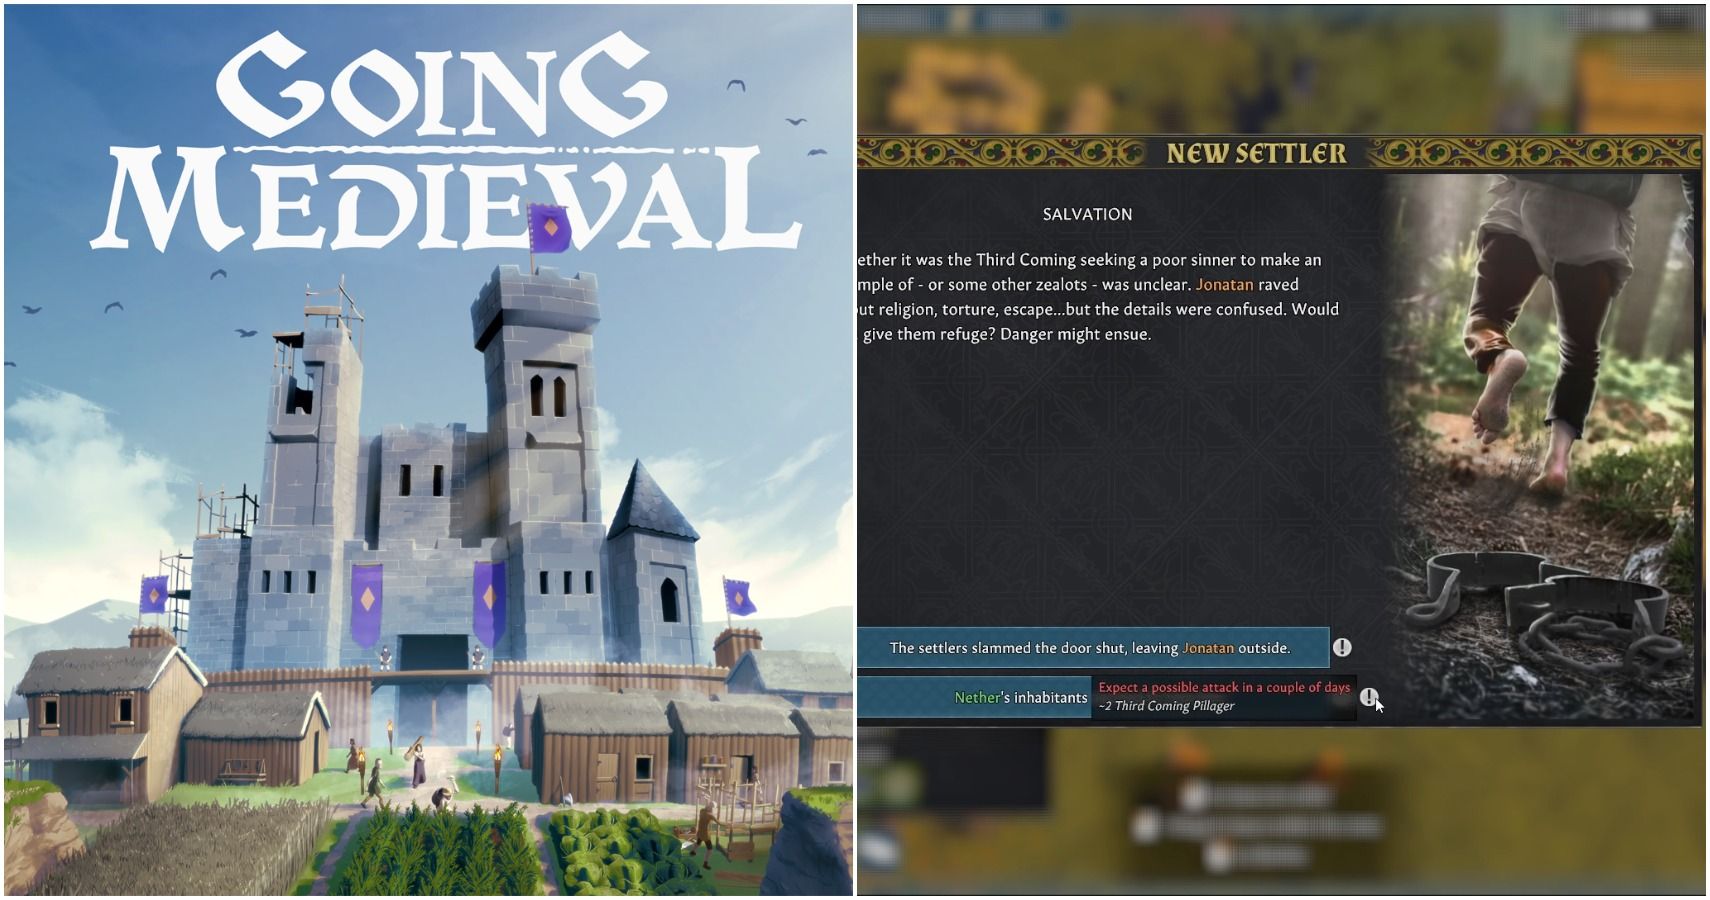 going medieval steam image and prisoner screen